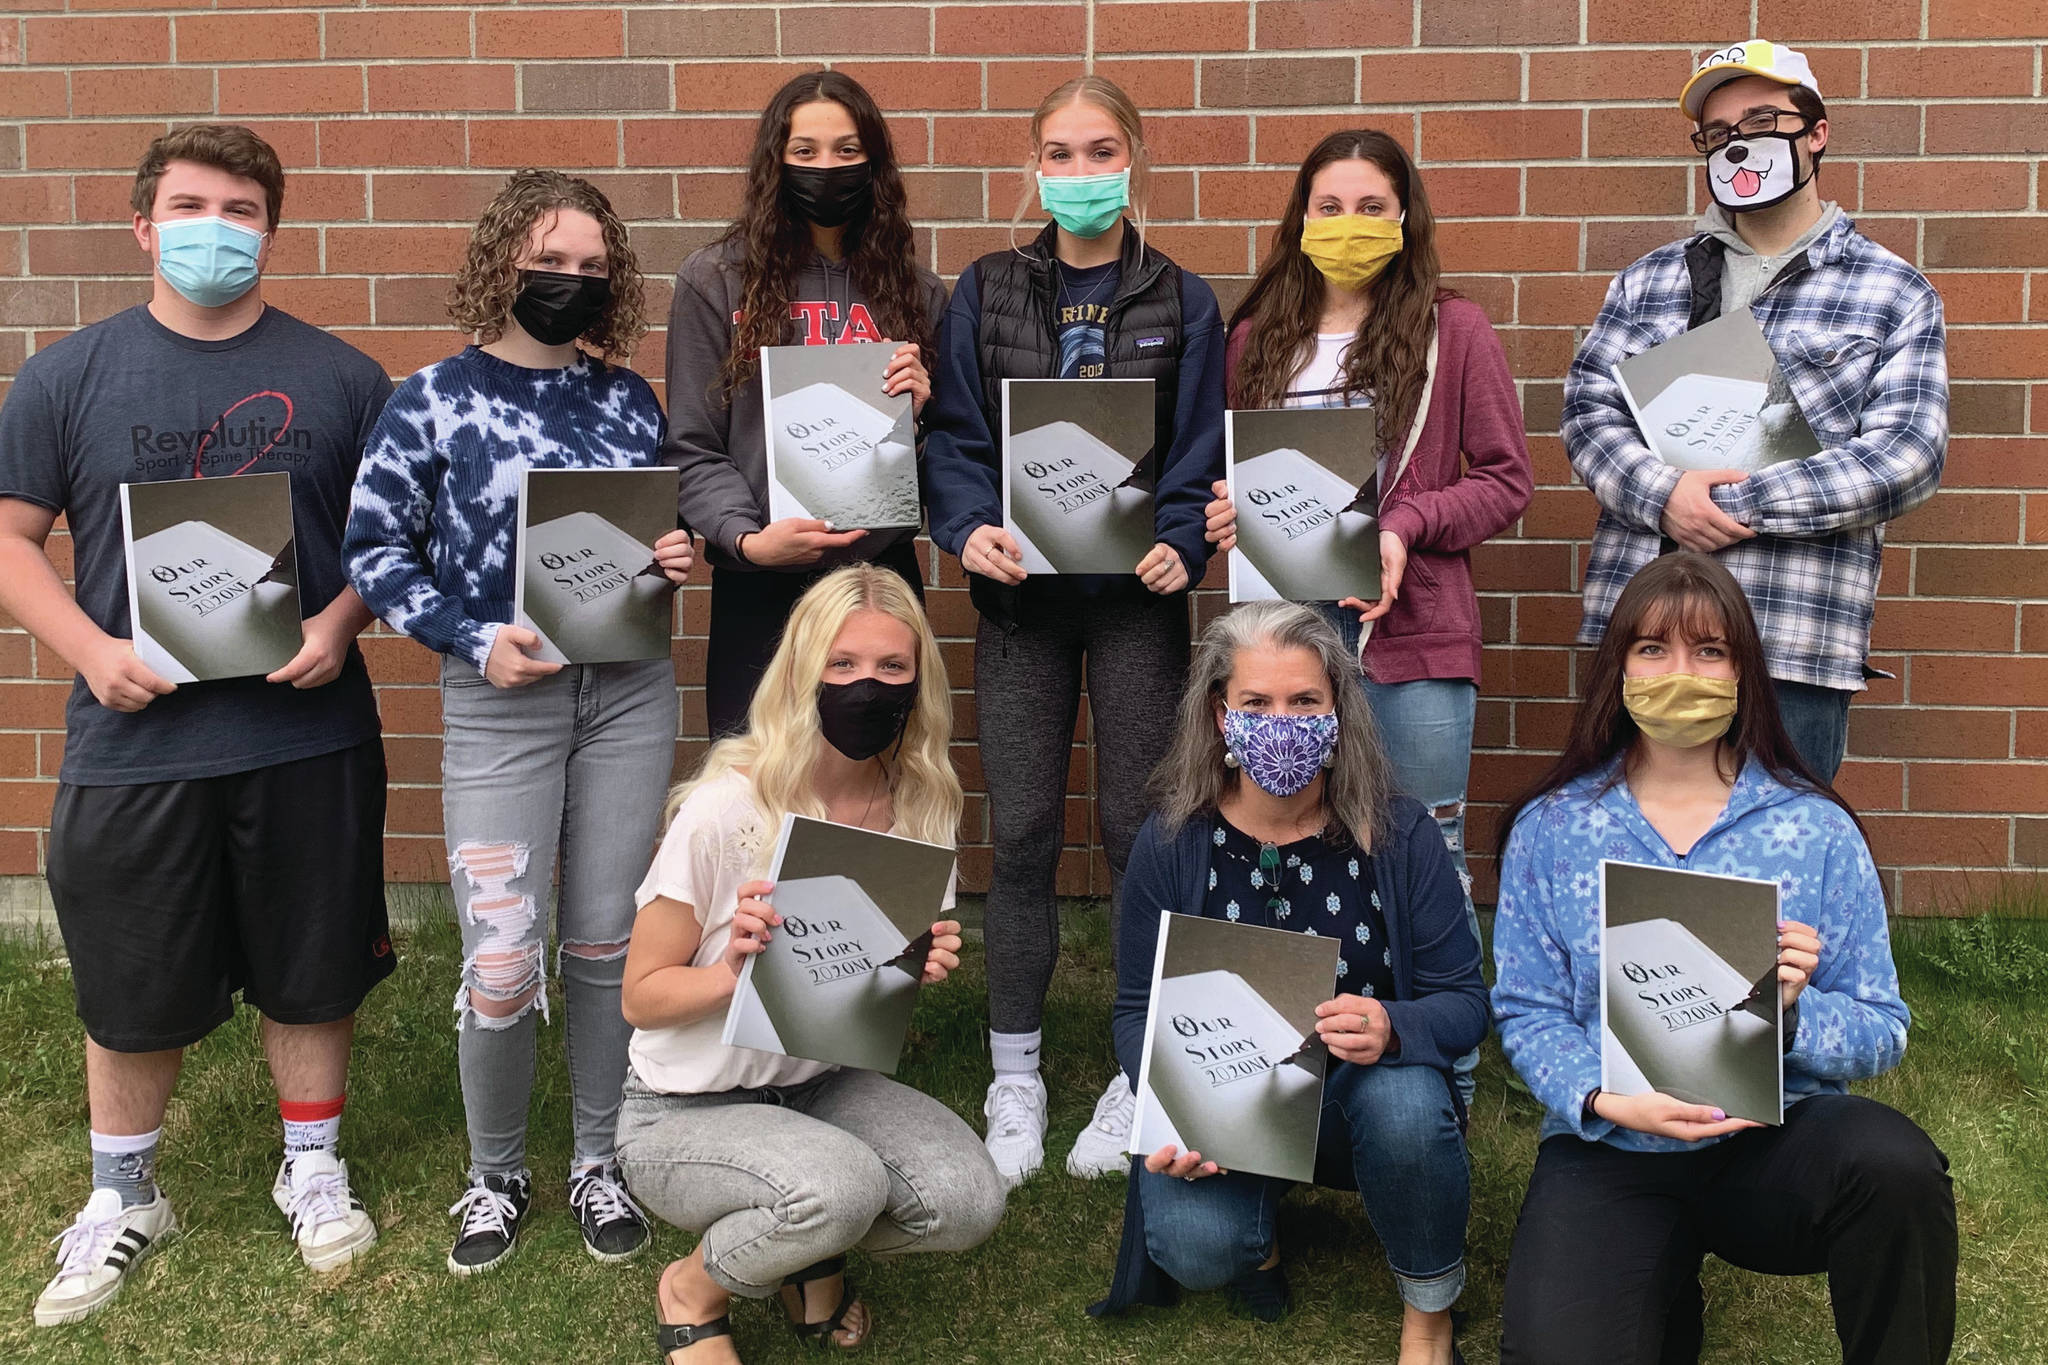 The Homer High School yearbook staff received a Jostens' national award for the 2021 yearbook. The yearbook "Our Story 202One" was credited for its inclusivity and creativity. Pictured is the yearbook staff with the yearbook. Back row left to right: Kamdyn Doughty, Katelyn Engebretsen, Madison Story, Paige Jones, Hannah Hatfield and Tristyn Romeril. Bottom row: Mya Houglum, Suzanne Bishop and Mariah McGuire. Photo submitted by Suzanne Bishop.